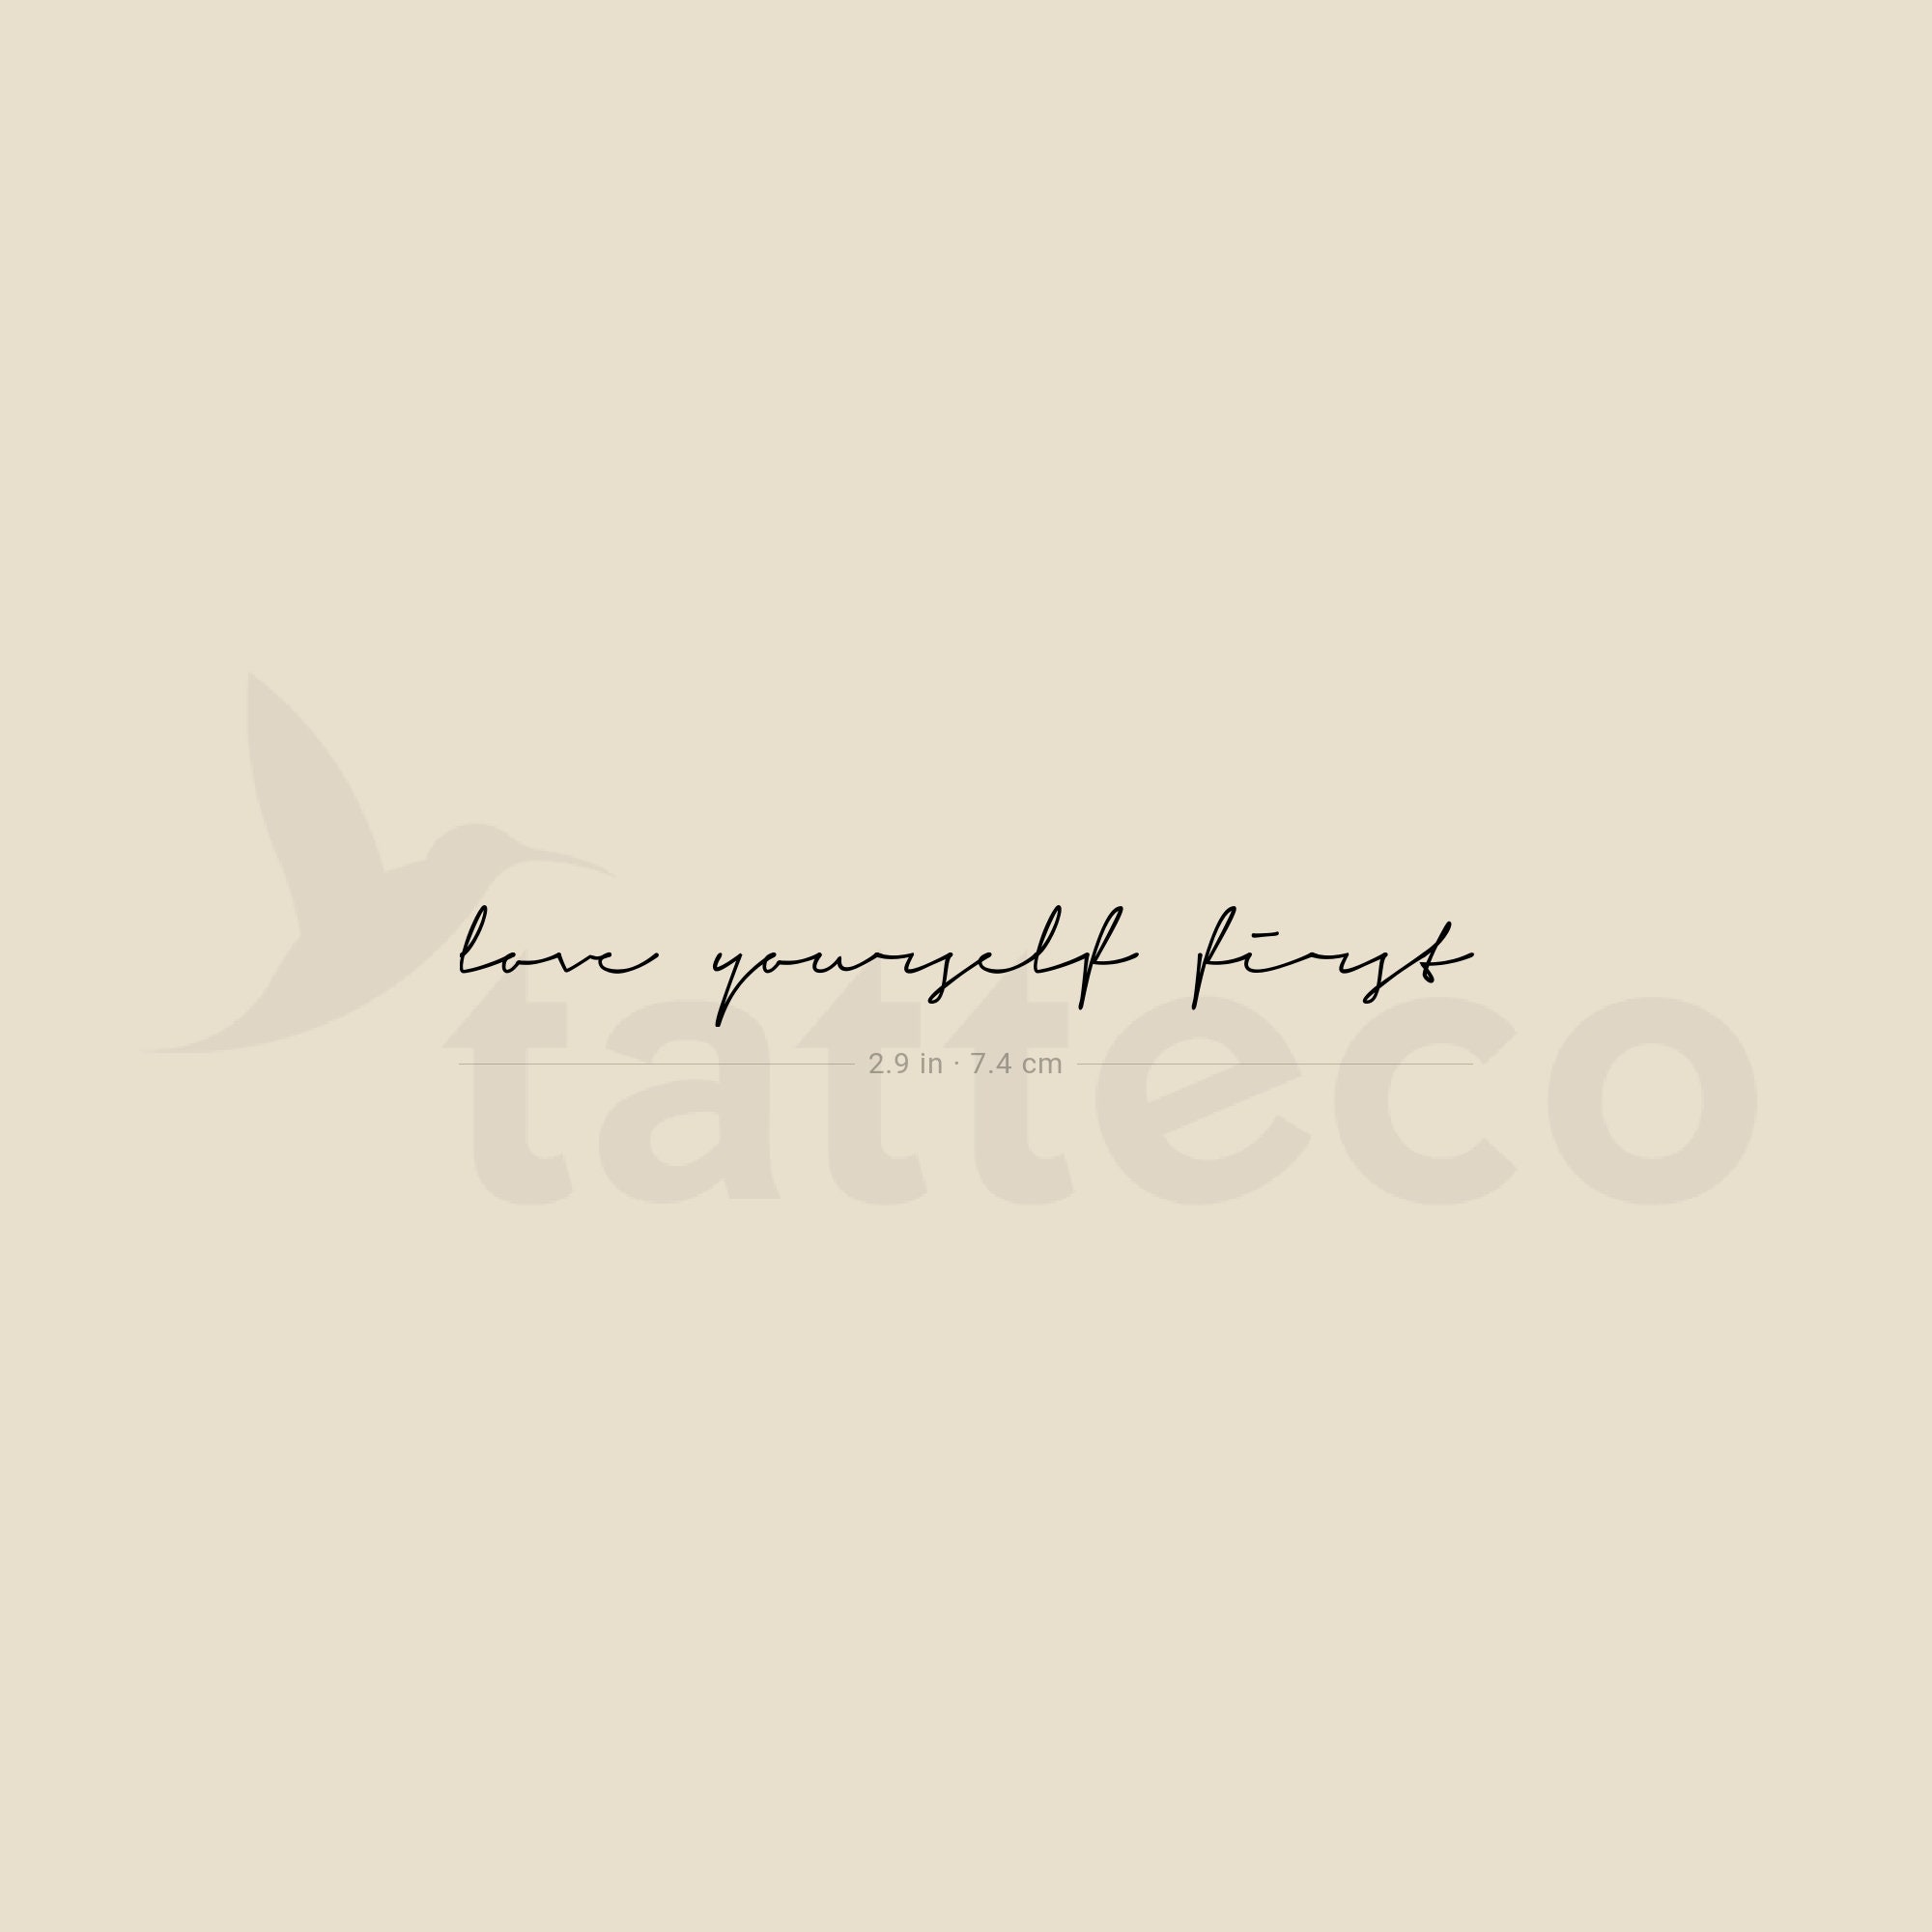 Love yourself first' temporary tattoo, get it here ▻